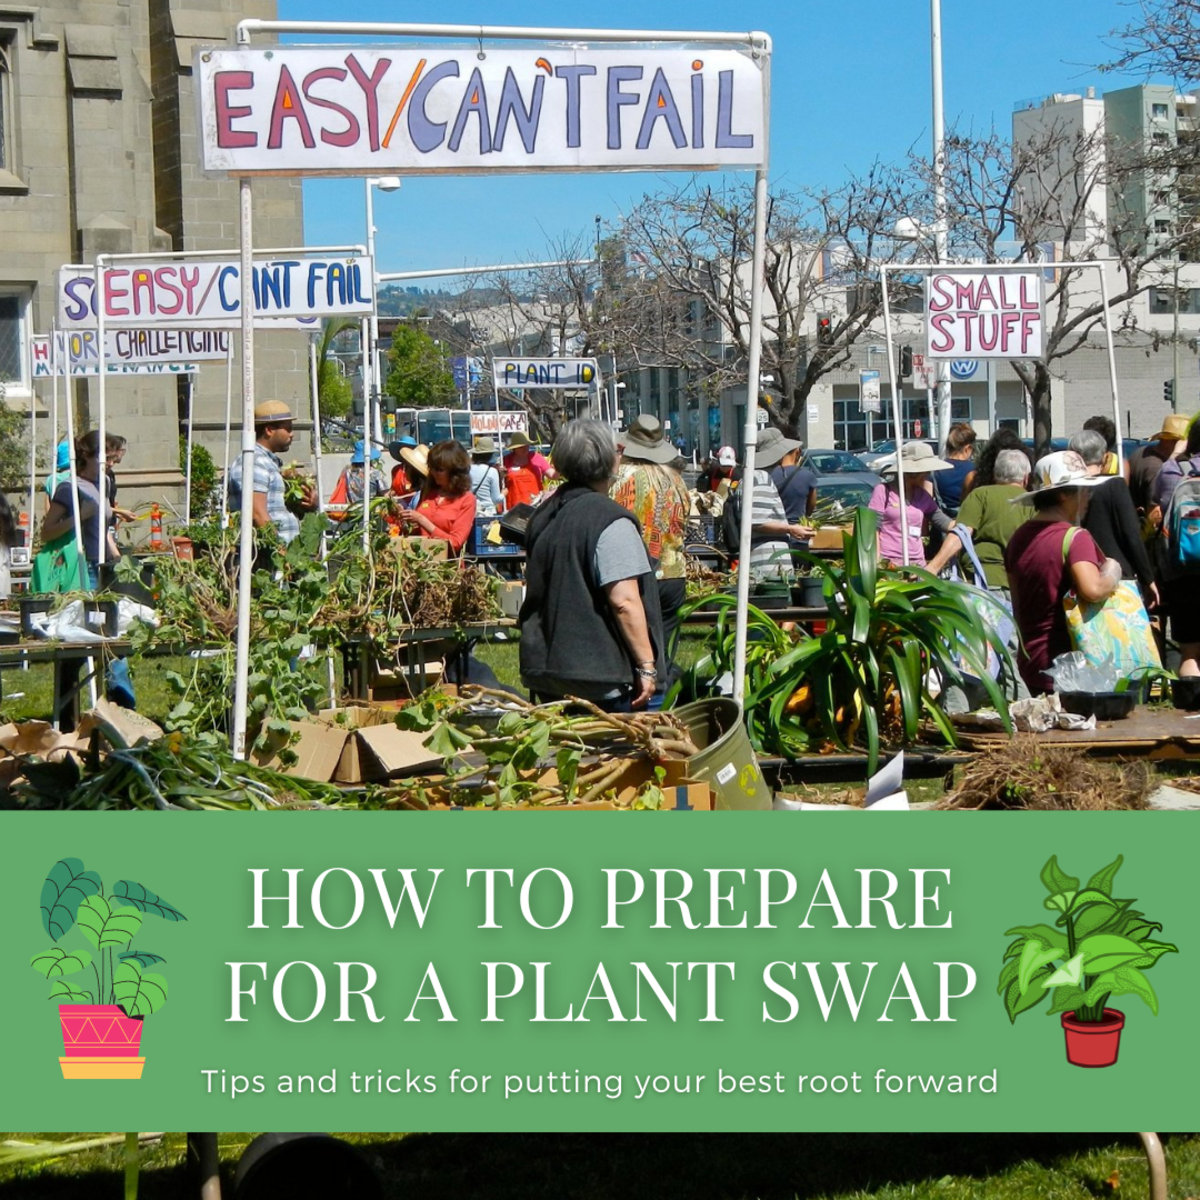 This article will provide some tips and tricks for how best to prepare for a plant swap. 